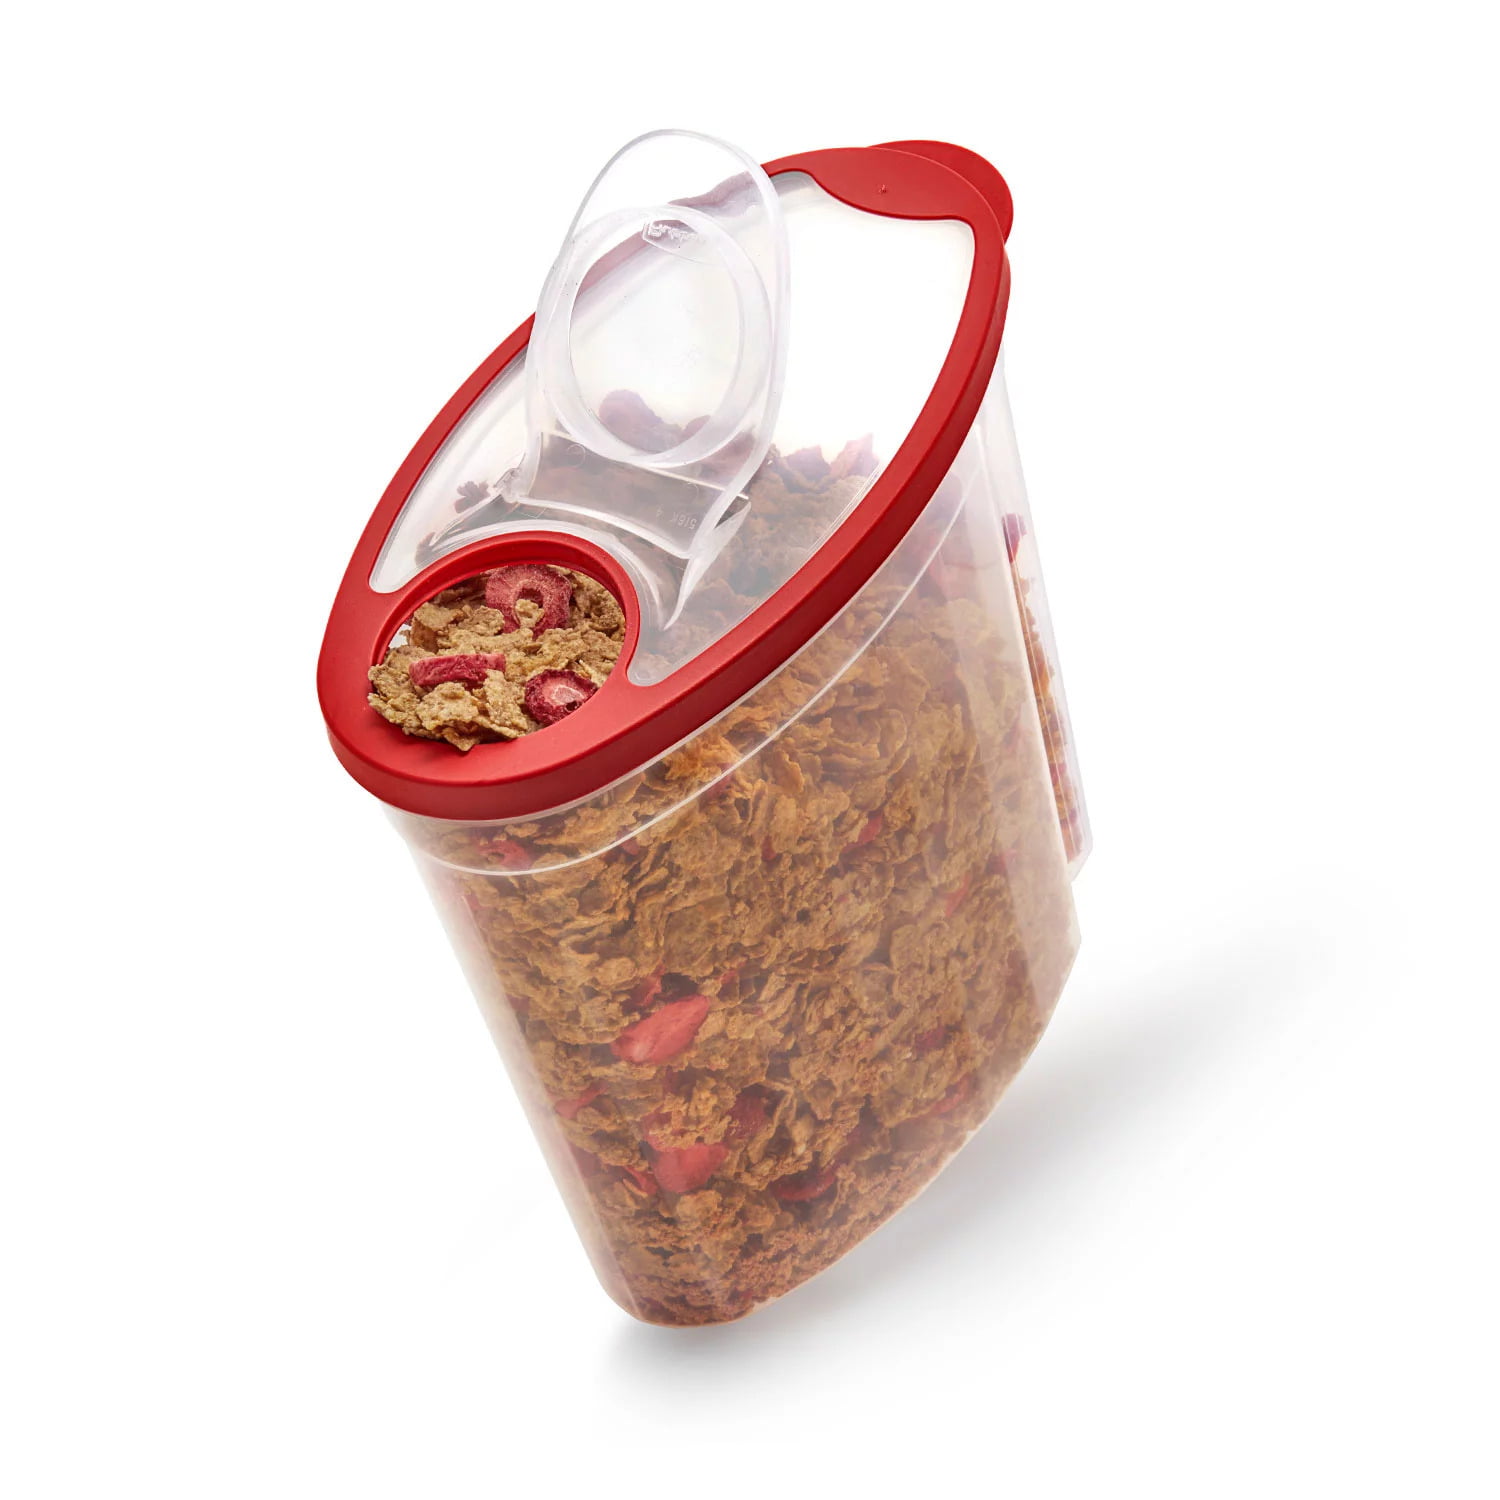 Rubbermaid 745176257628 Cereal/Snack Storage Container Each 1.5